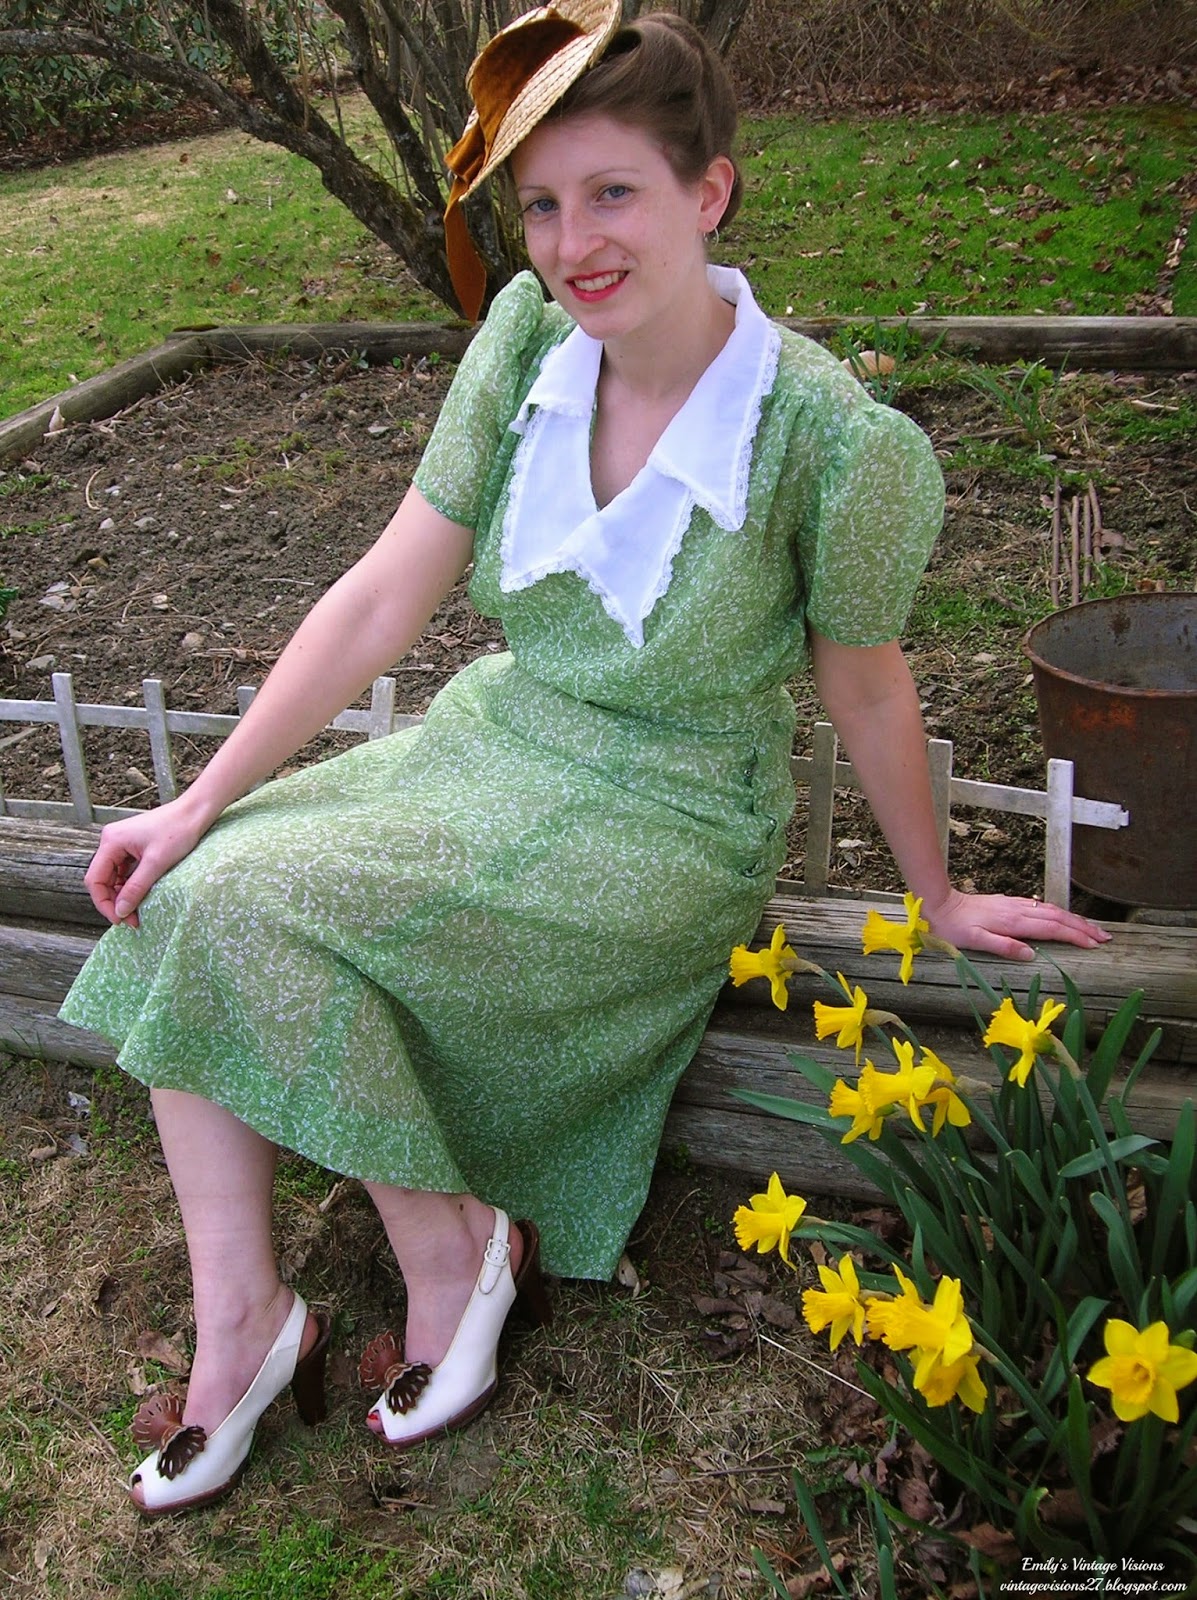 Emily's Vintage Visions: Sew for Victory - The Finished Dress!